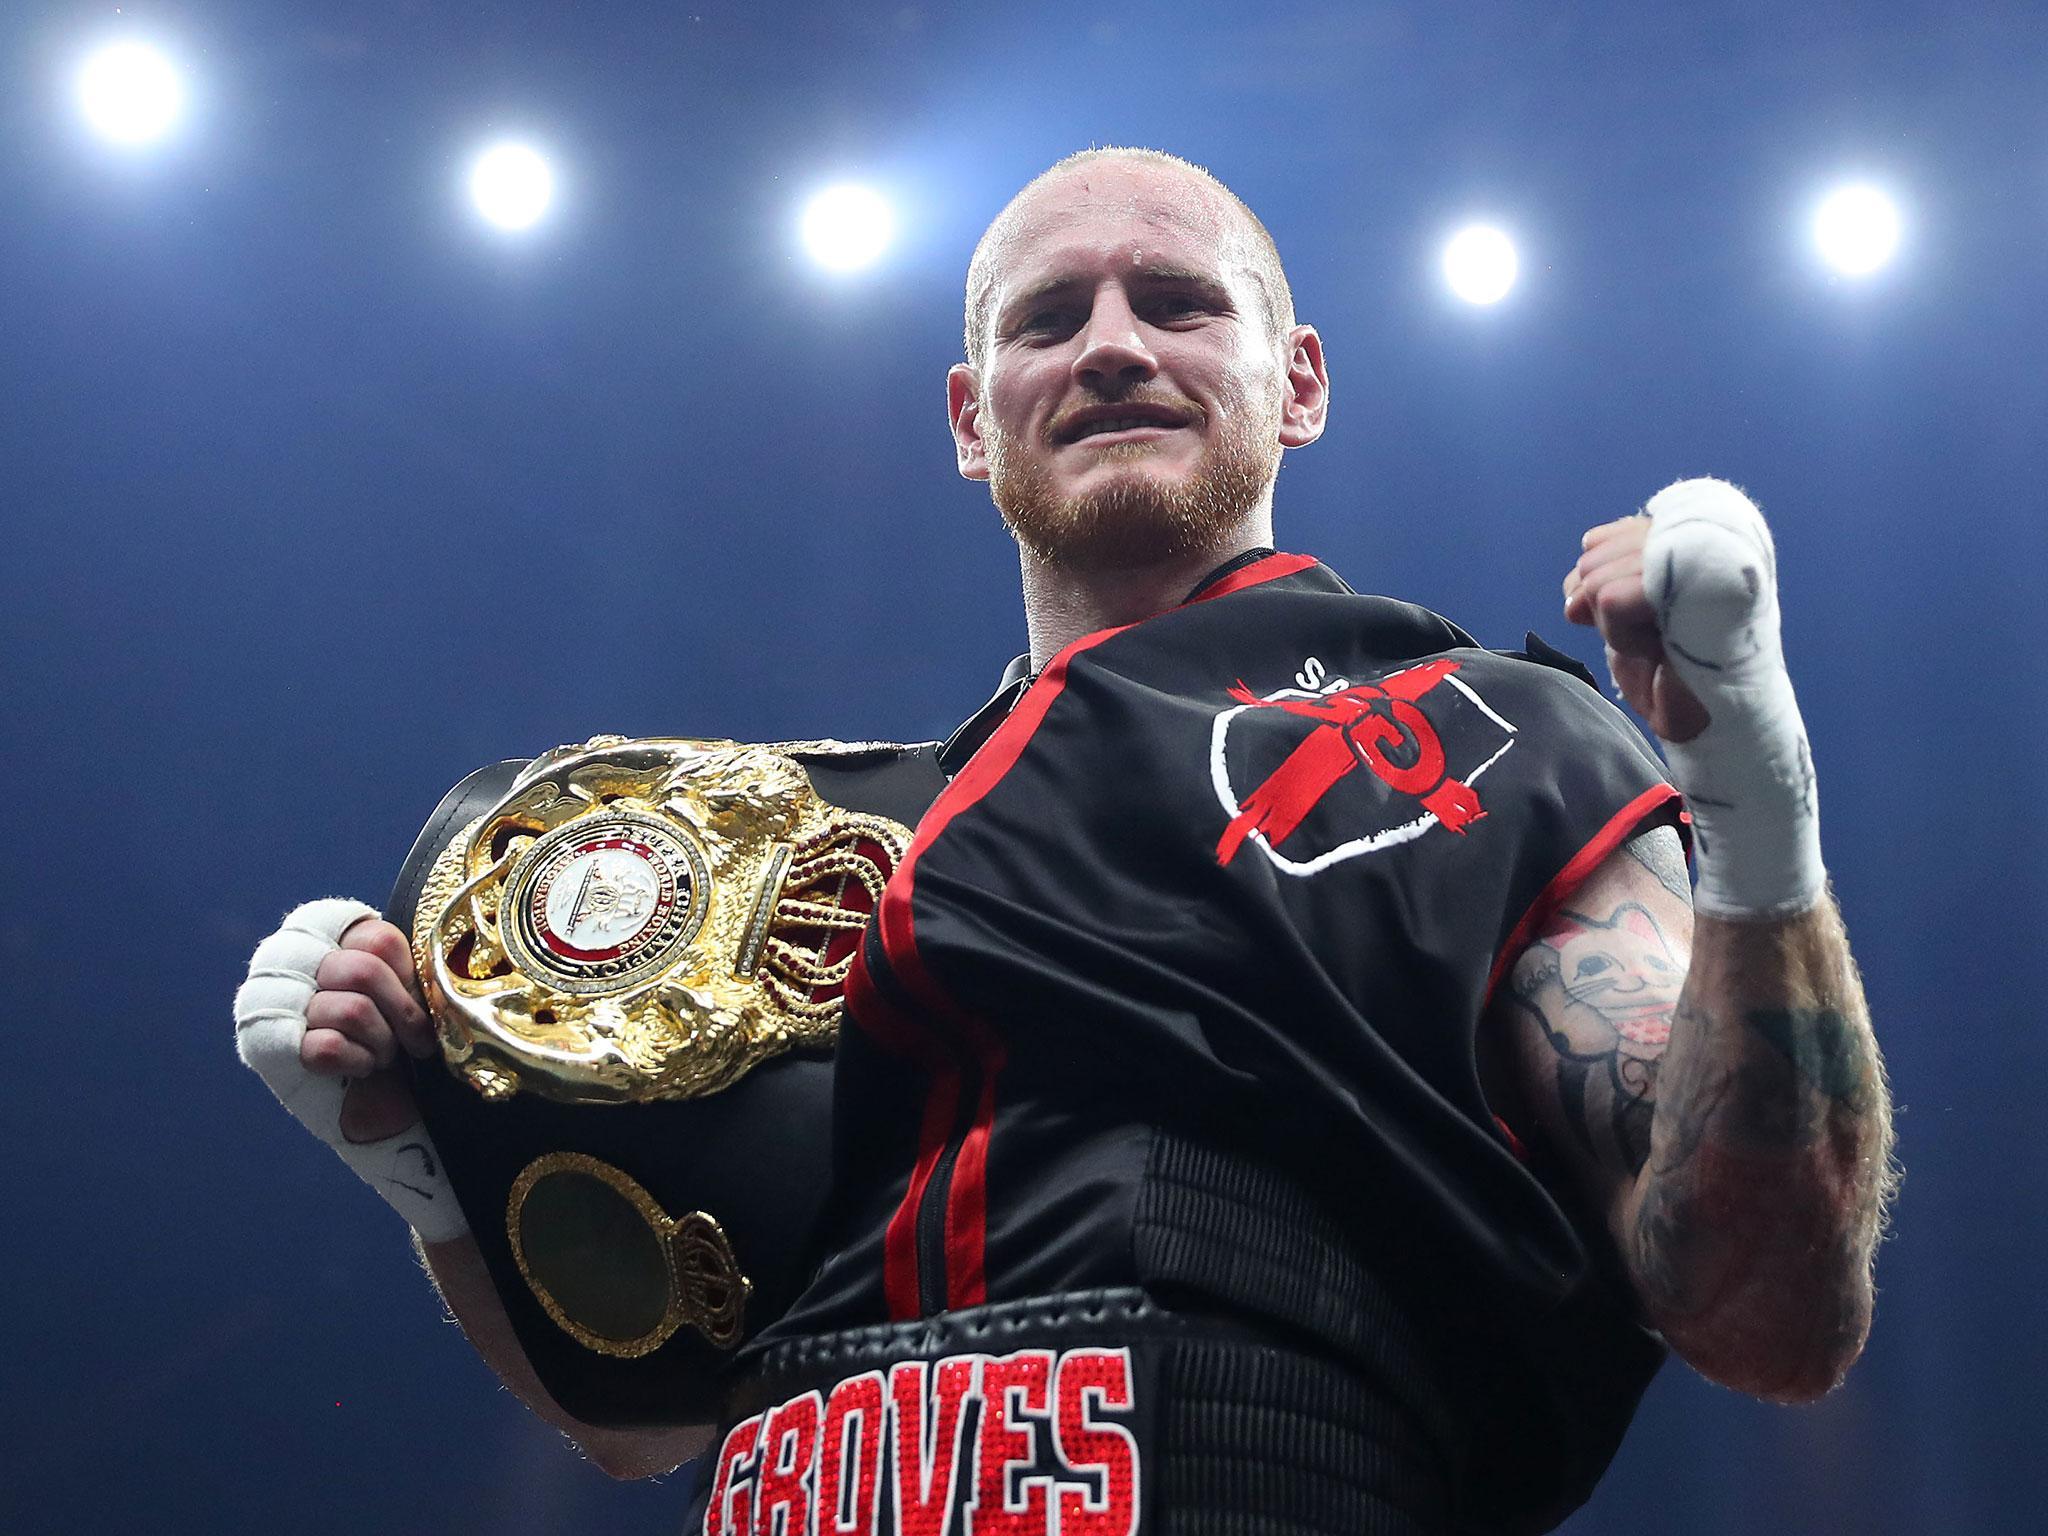 George Groves will fight Chris Eubank Jr next after defeating Jamie Cox